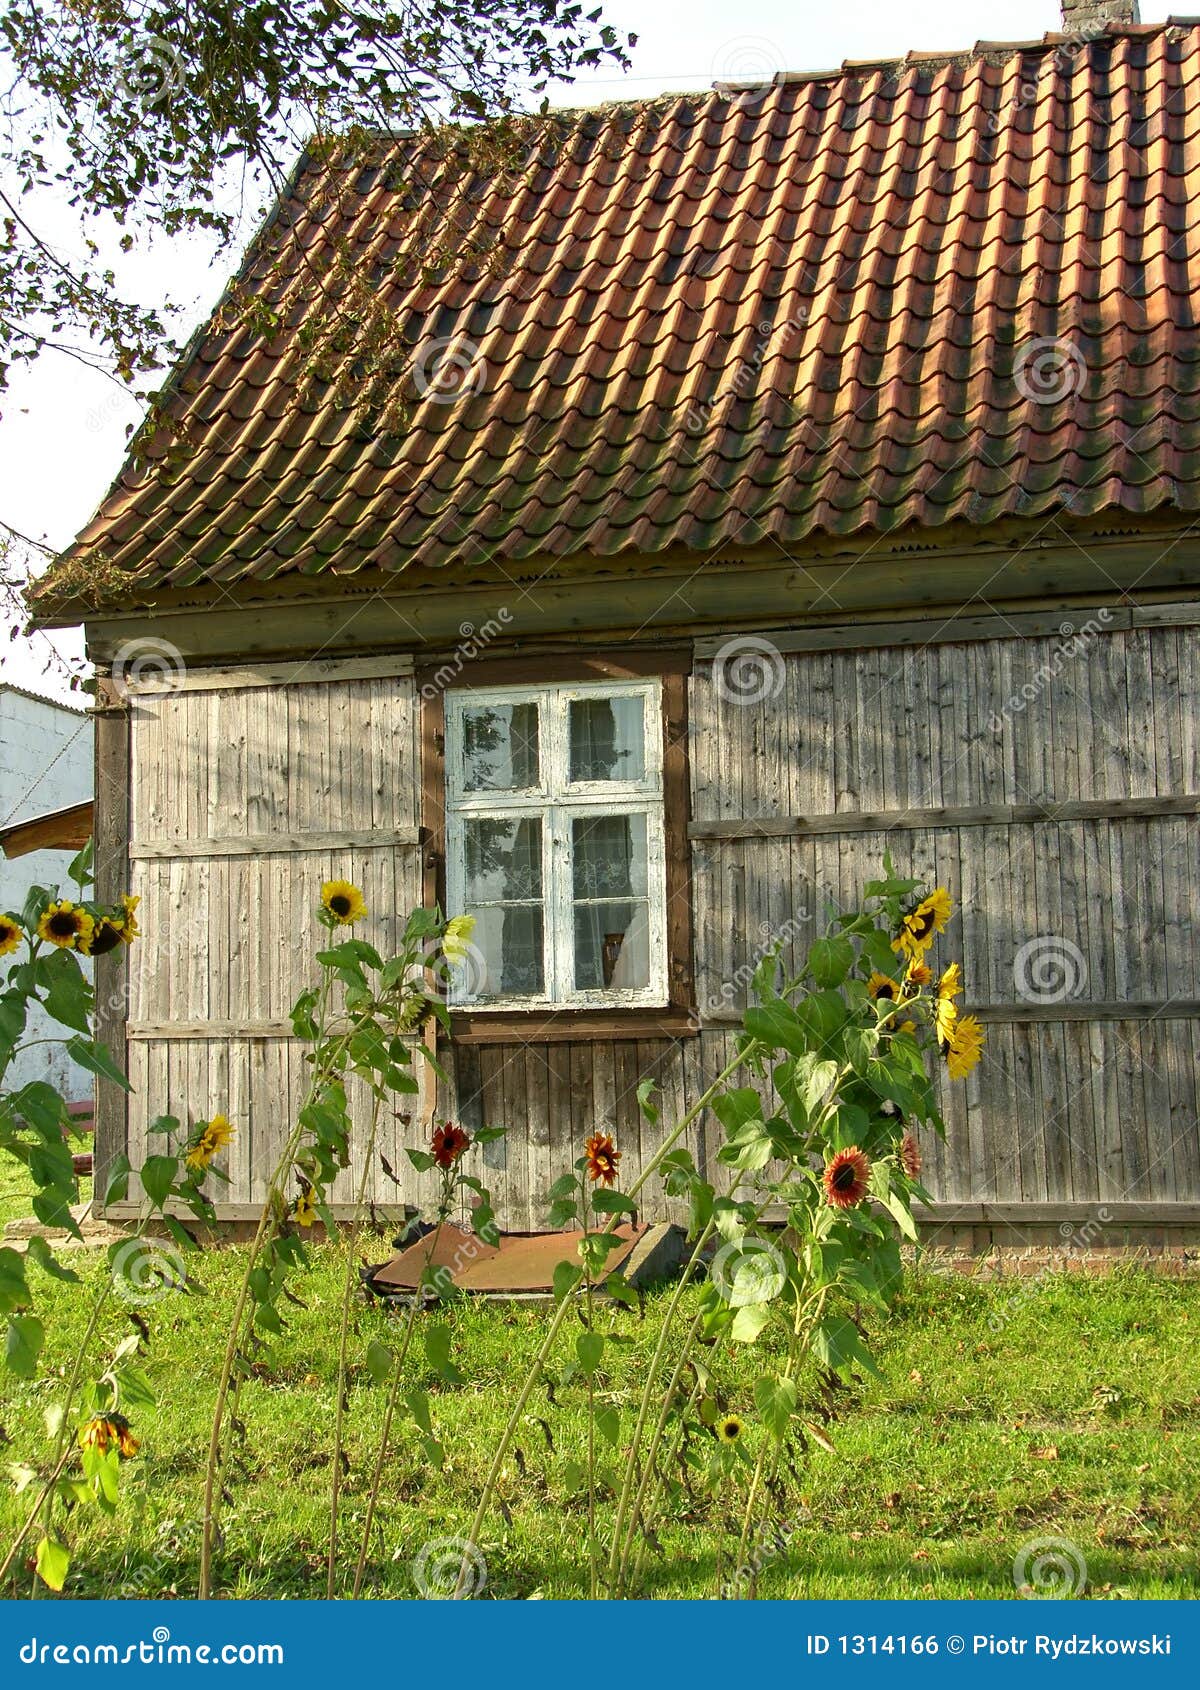 house and sunflowers